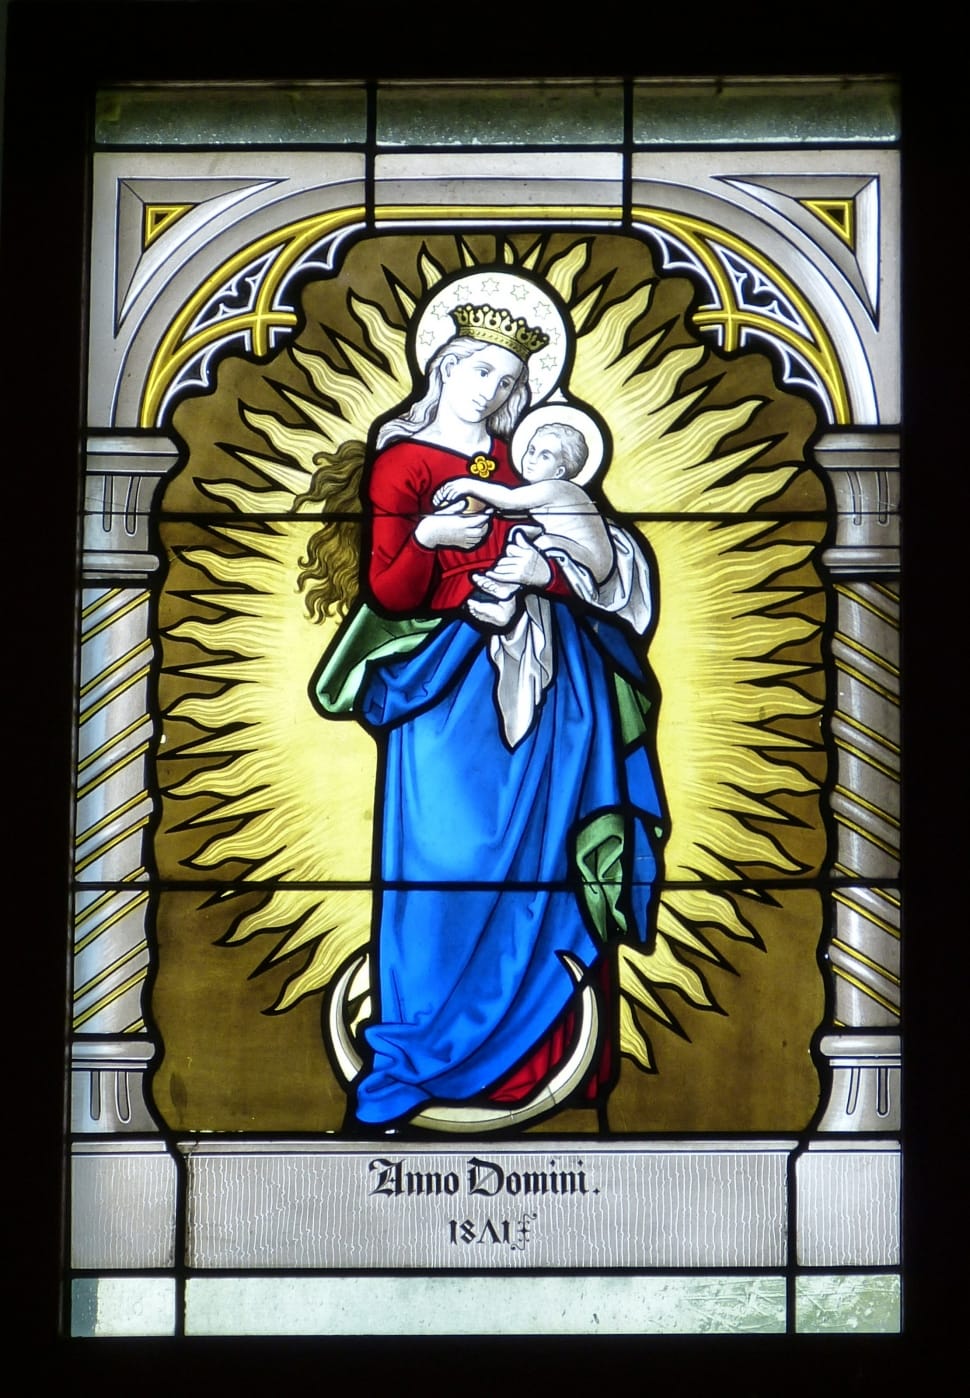 Anno Domini Isai stainted glass decor preview